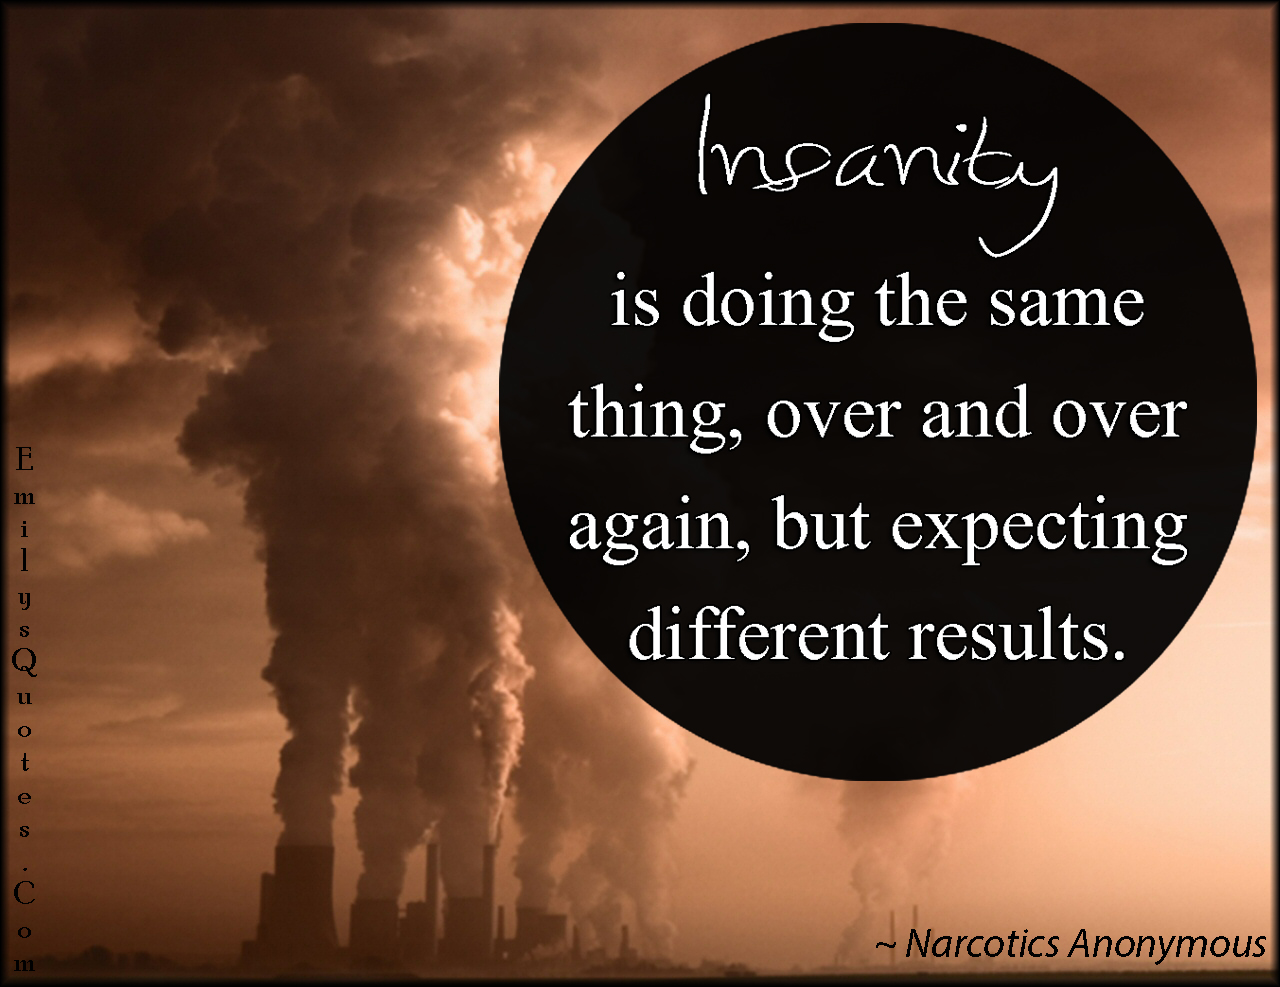 Insanity is doing the same thing, over and over again, but expecting different results